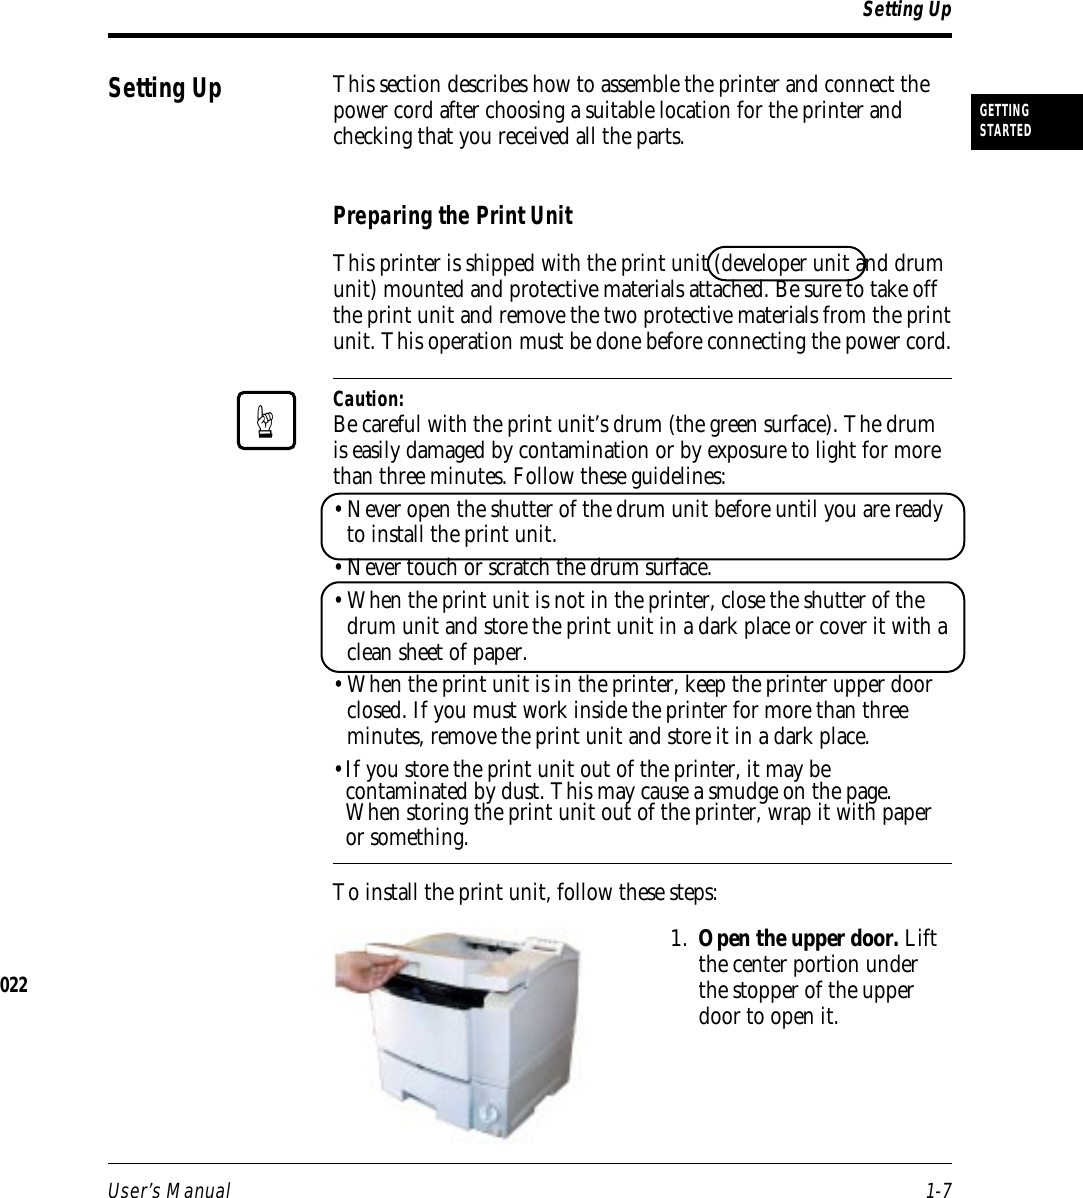 User’s Manual 1-7GETTINGSTARTEDThis section describes how to assemble the printer and connect thepower cord after choosing a suitable location for the printer andchecking that you received all the parts.Preparing the Print UnitThis printer is shipped with the print unit (developer unit and drumunit) mounted and protective materials attached. Be sure to take offthe print unit and remove the two protective materials from the printunit. This operation must be done before connecting the power cord.Caution:Be careful with the print unit’s drum (the green surface). The drumis easily damaged by contamination or by exposure to light for morethan three minutes. Follow these guidelines:• Never open the shutter of the drum unit before until you are readyto install the print unit.• Never touch or scratch the drum surface.• When the print unit is not in the printer, close the shutter of thedrum unit and store the print unit in a dark place or cover it with aclean sheet of paper.• When the print unit is in the printer, keep the printer upper doorclosed. If you must work inside the printer for more than threeminutes, remove the print unit and store it in a dark place.•If you store the print unit out of the printer, it may becontaminated by dust. This may cause a smudge on the page.When storing the print unit out of the printer, wrap it with paperor something.To install the print unit, follow these steps:1. Open the upper door. Liftthe center portion underthe stopper of the upperdoor to open it.Setting UpSetting Up☞022